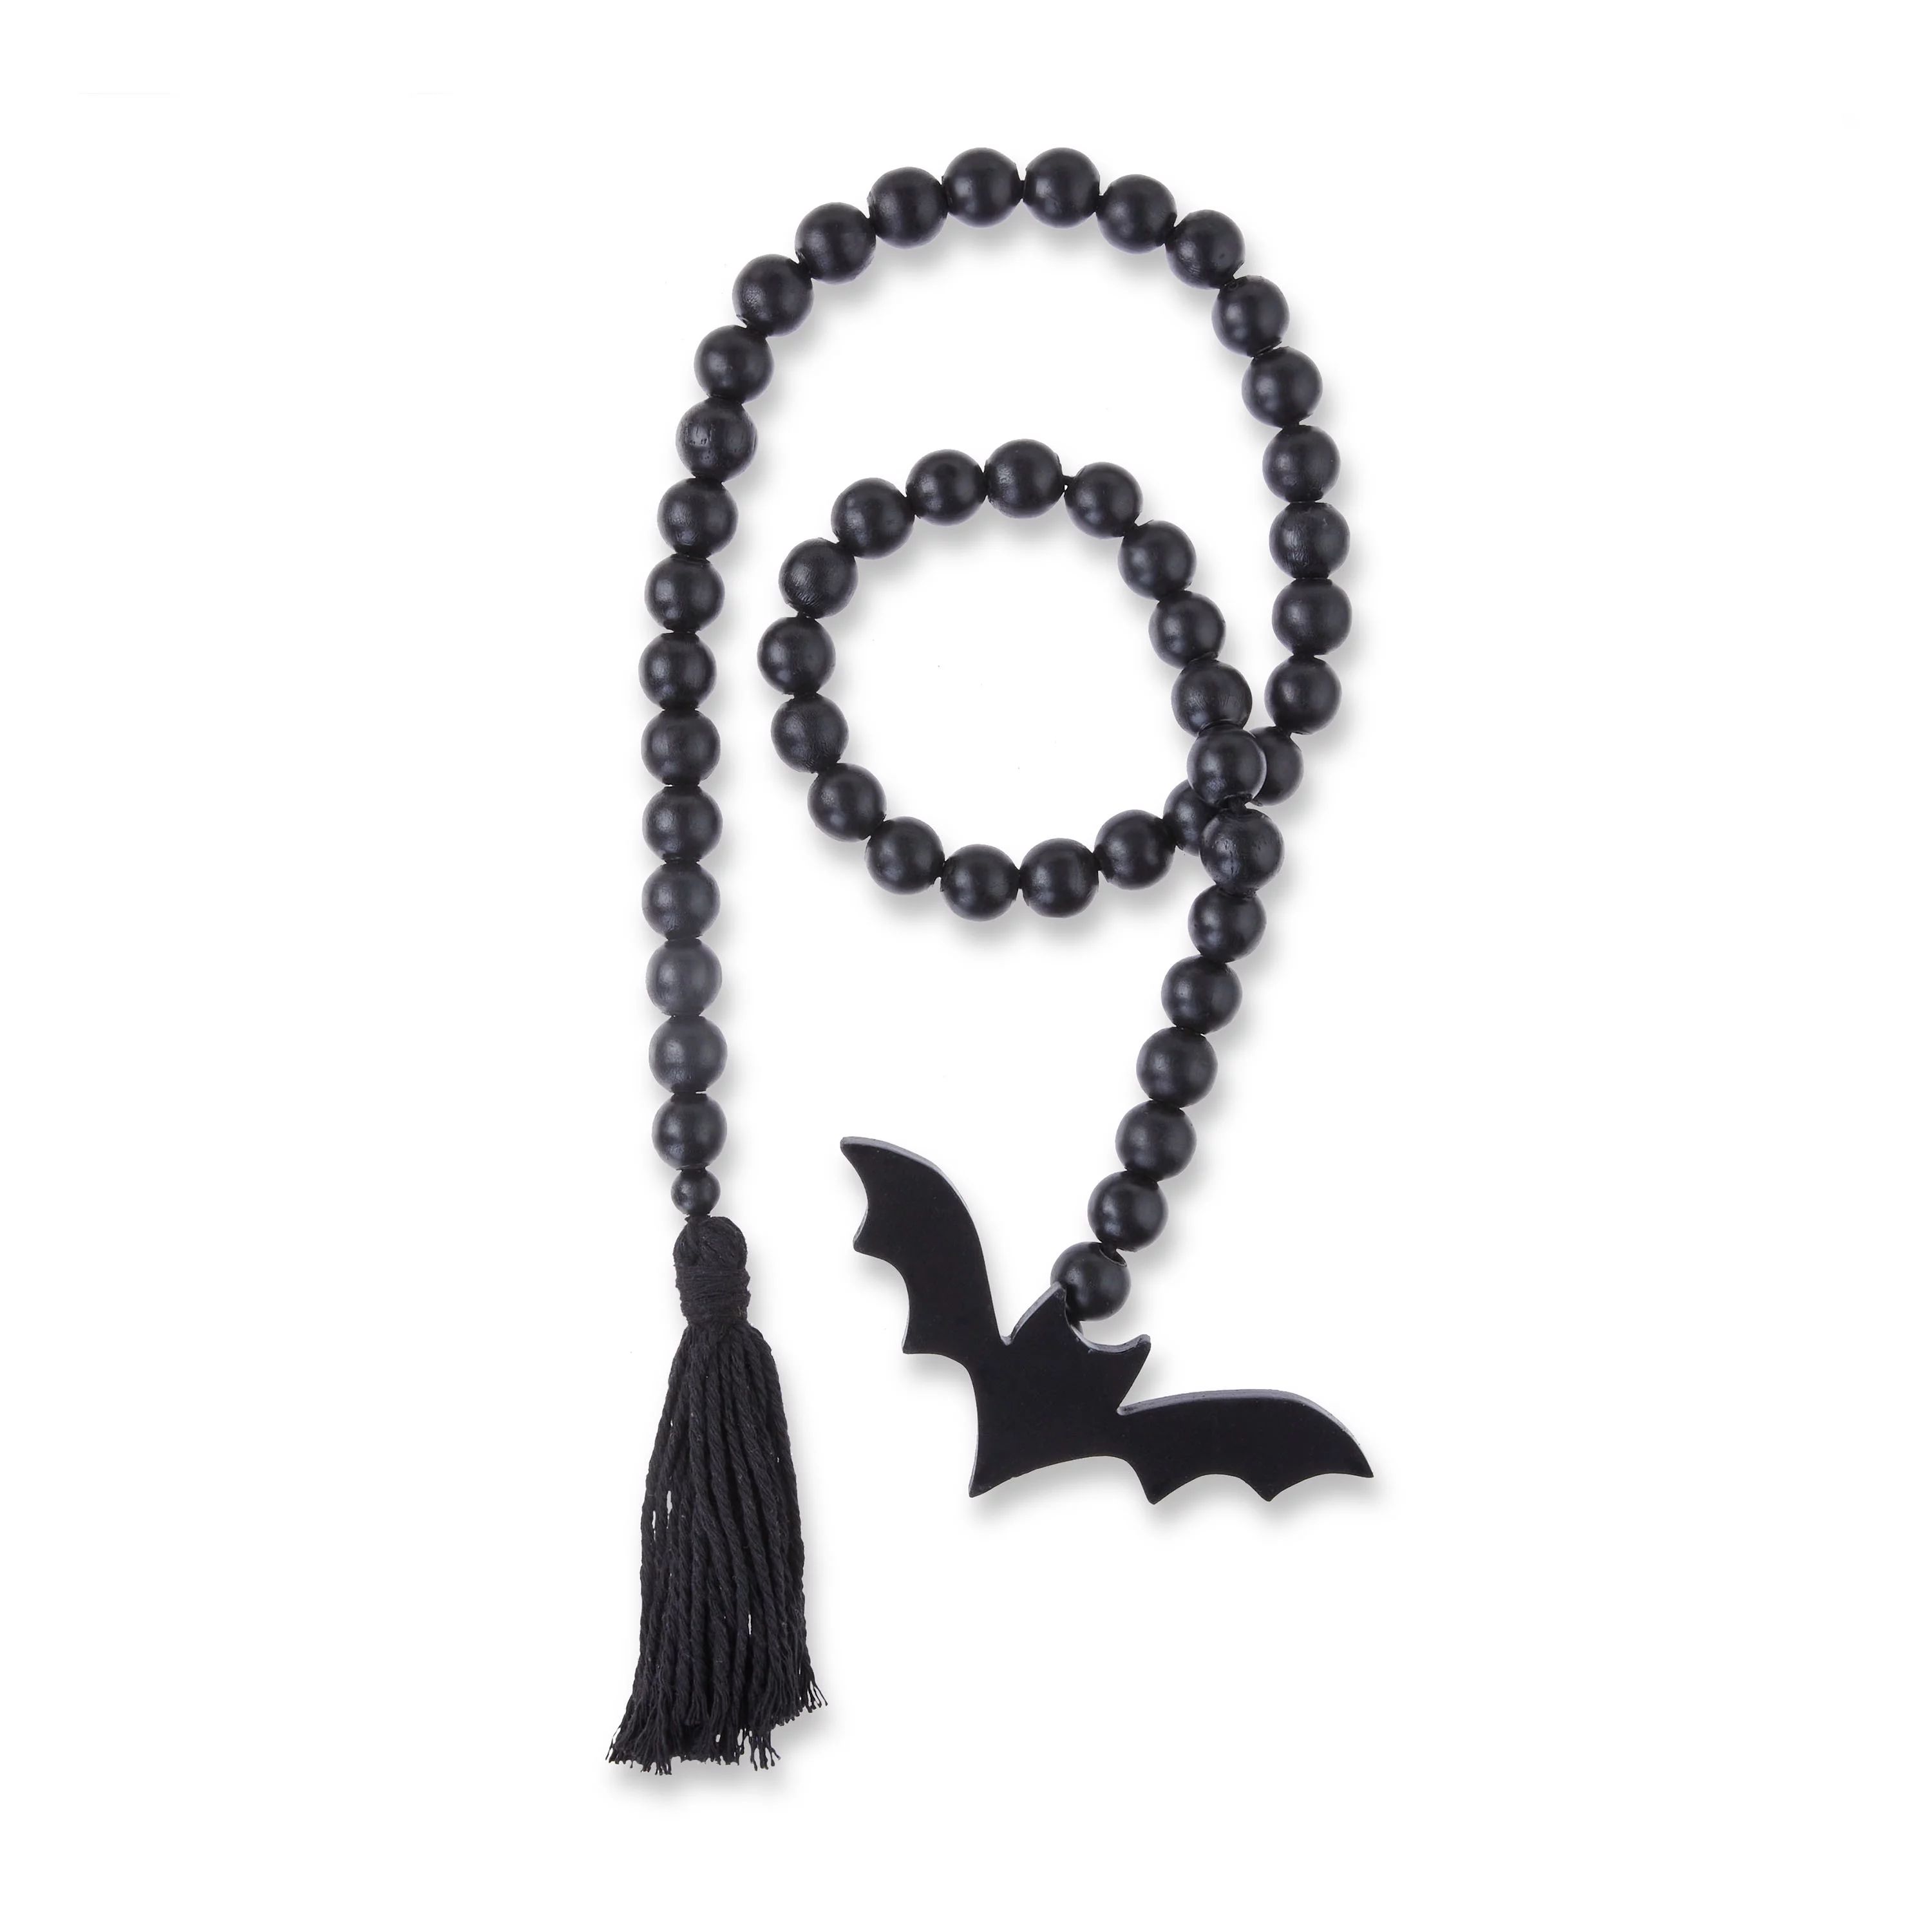 Halloween Black Wood Bead Garland Decoration, 2.1 in x 36 in, by Way To Celebrate | Walmart (US)